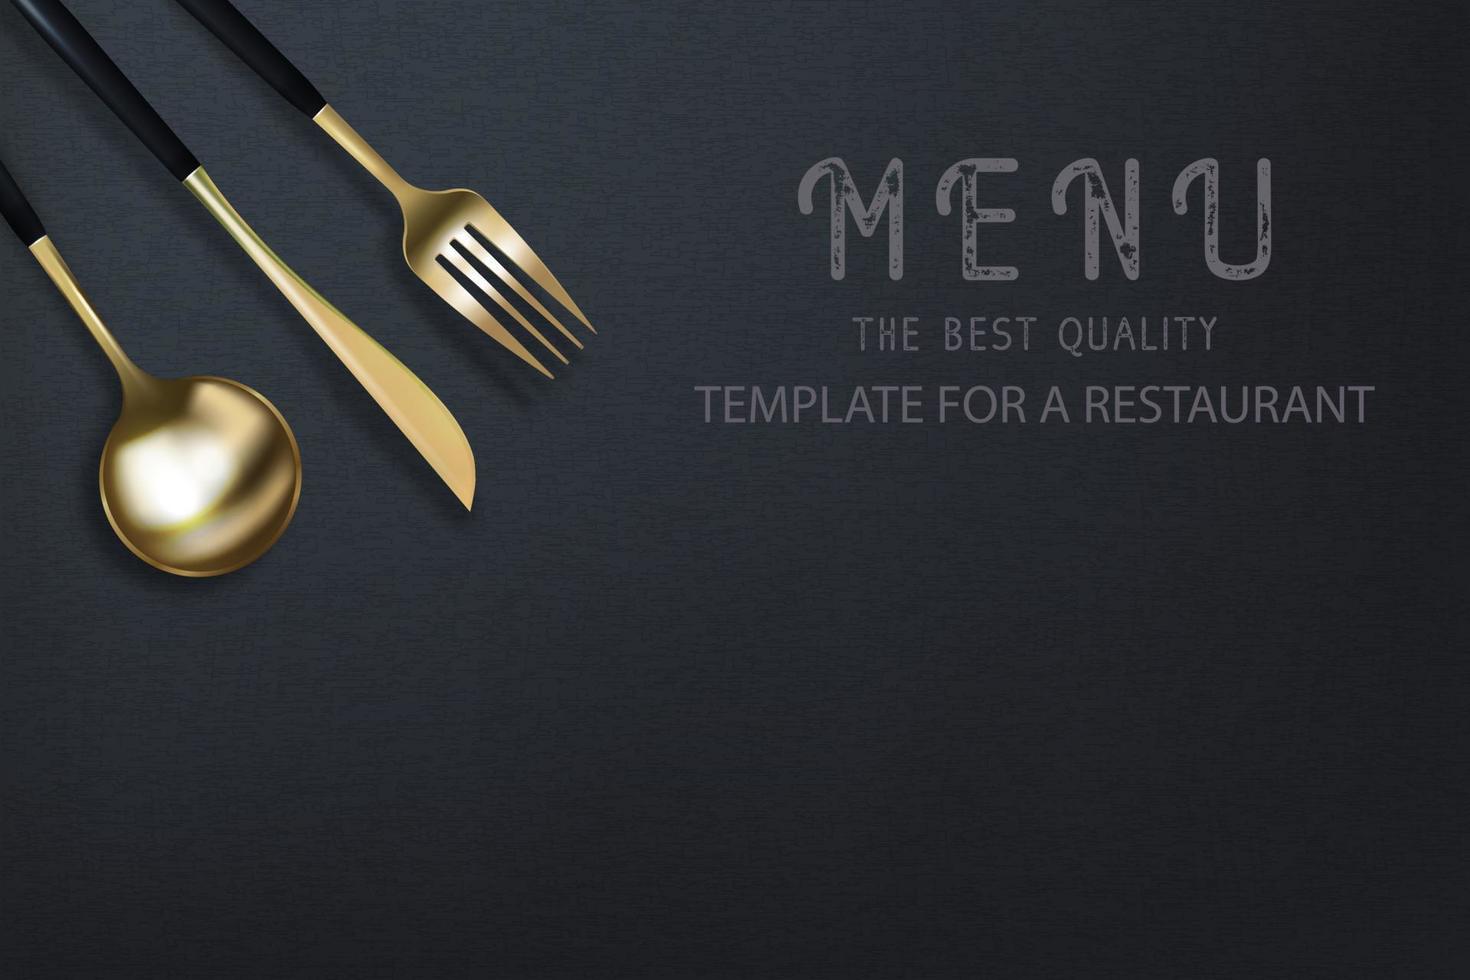 Realistic 3D golden fork, knife and spoon on a black grunge background. Fashionable modern poster for a restaurant. Top view vector illustration.